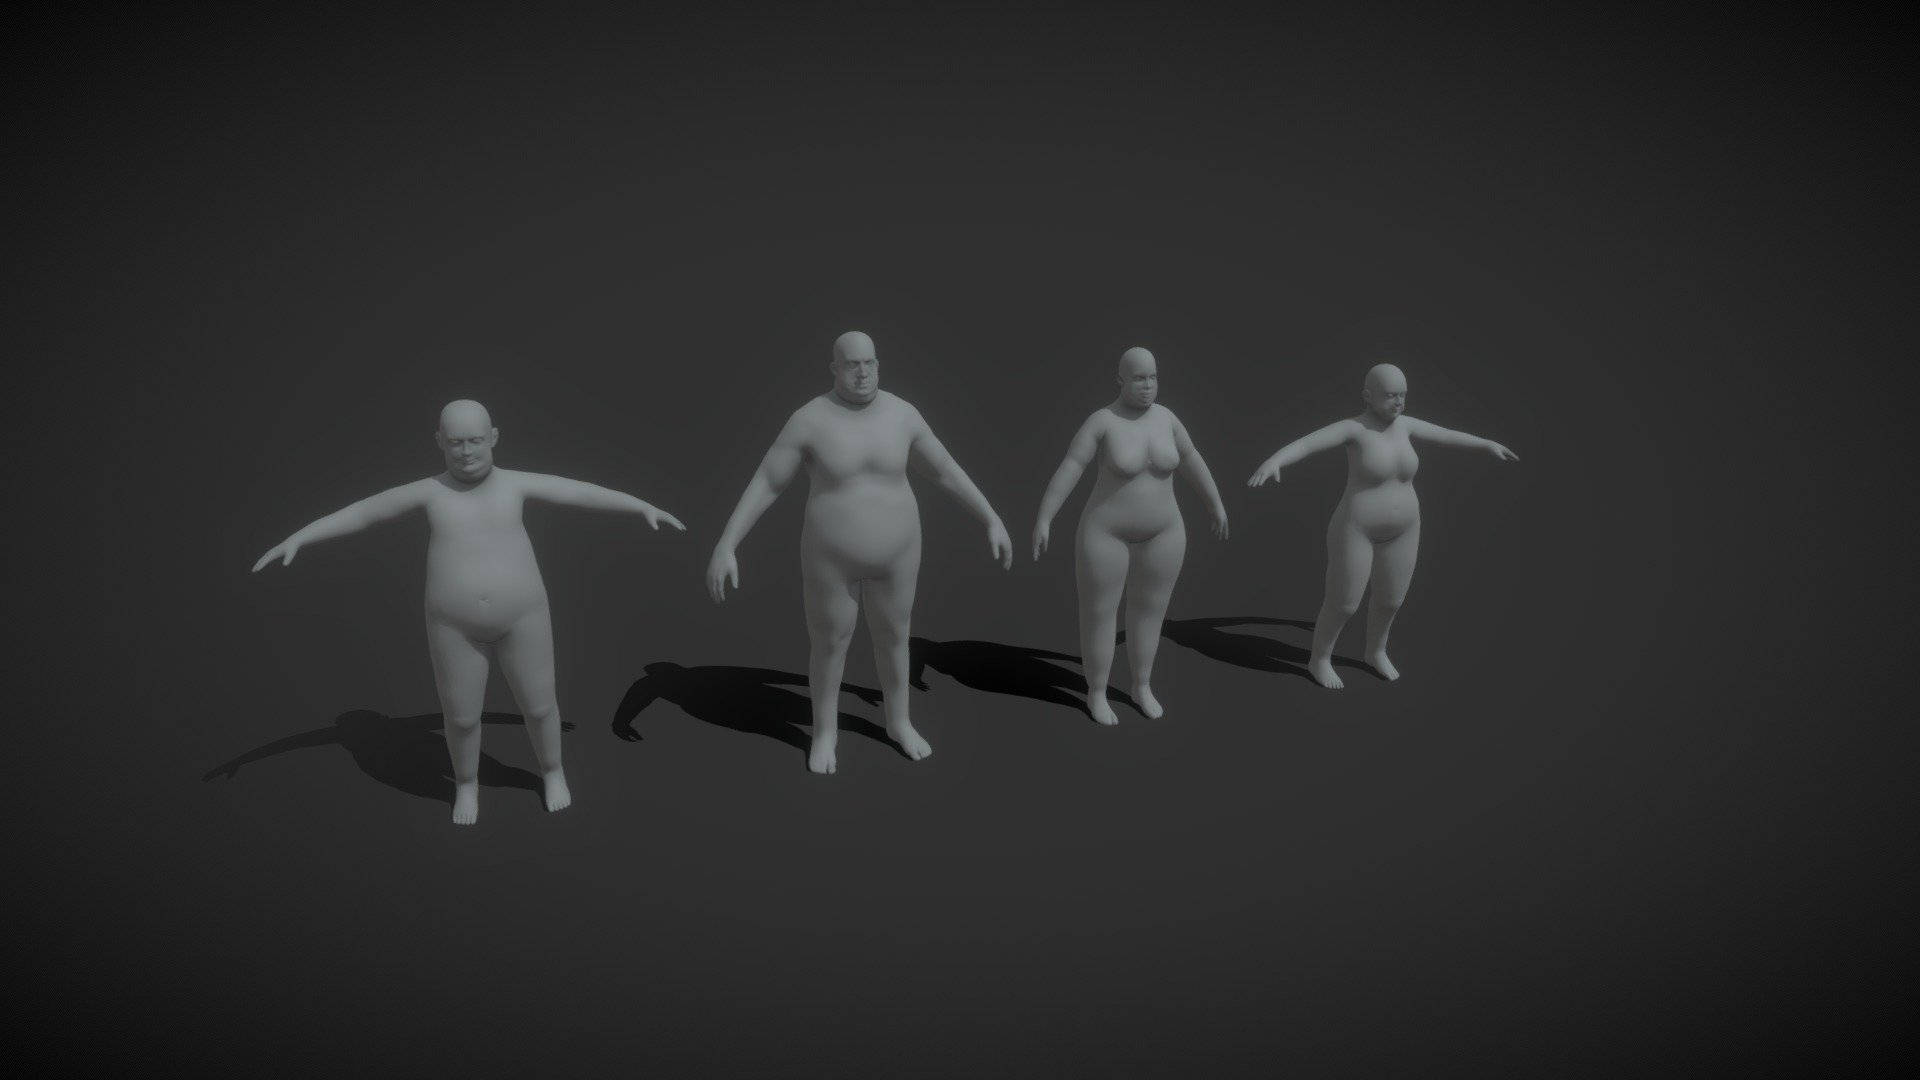 Fat Human Body Base Mesh 3D Model Family Pack 20k Polygons consists of 4 base mesh models:  


Male Body Fat Base Mesh 3D Model 20k Polygons (20168 Polygons, 19954 Vertices)  
Female Body Fat Base Mesh 3D Model 20k Polygons (20015 Polygons, 19678 Vertices)  
Fat Boy Kid Body Base Mesh 3D Model 20k Polygons (20840 Polygons, 19759 Vertices)  
Fat Girl Kid Body Base Mesh 3D Model 20k Polygons (20908 Polygons, 19804 Vertices)  

Technical details:  


File formats included in the package are (ask if needed): FBX, OBJ, GLB, ABC, DAE, PLY, STL, BLEND, gLTF (generated), USDZ (generated)  
Native software file format: BLEND  
Polygons: 81,931 (around 20k per model)  
Vertices: 79,915 (around 20k per model)  

You can buy any of them as a single model, or save 25% if you buy this pack 3d model